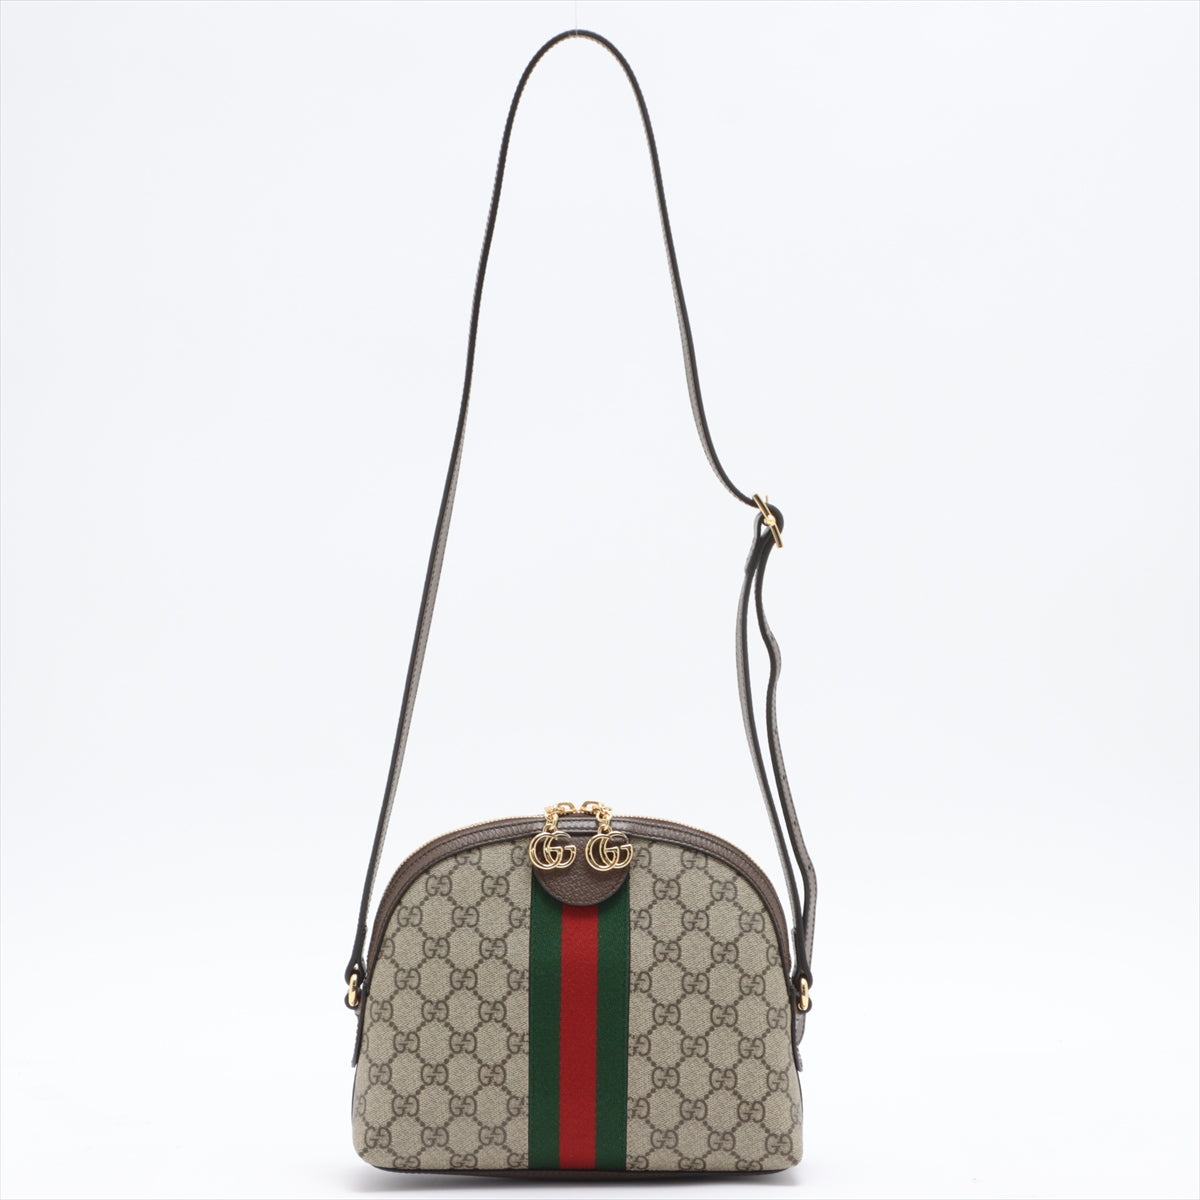 Bag of the Week: The Gucci Ophidia Shoulder Bag – Inside The Closet